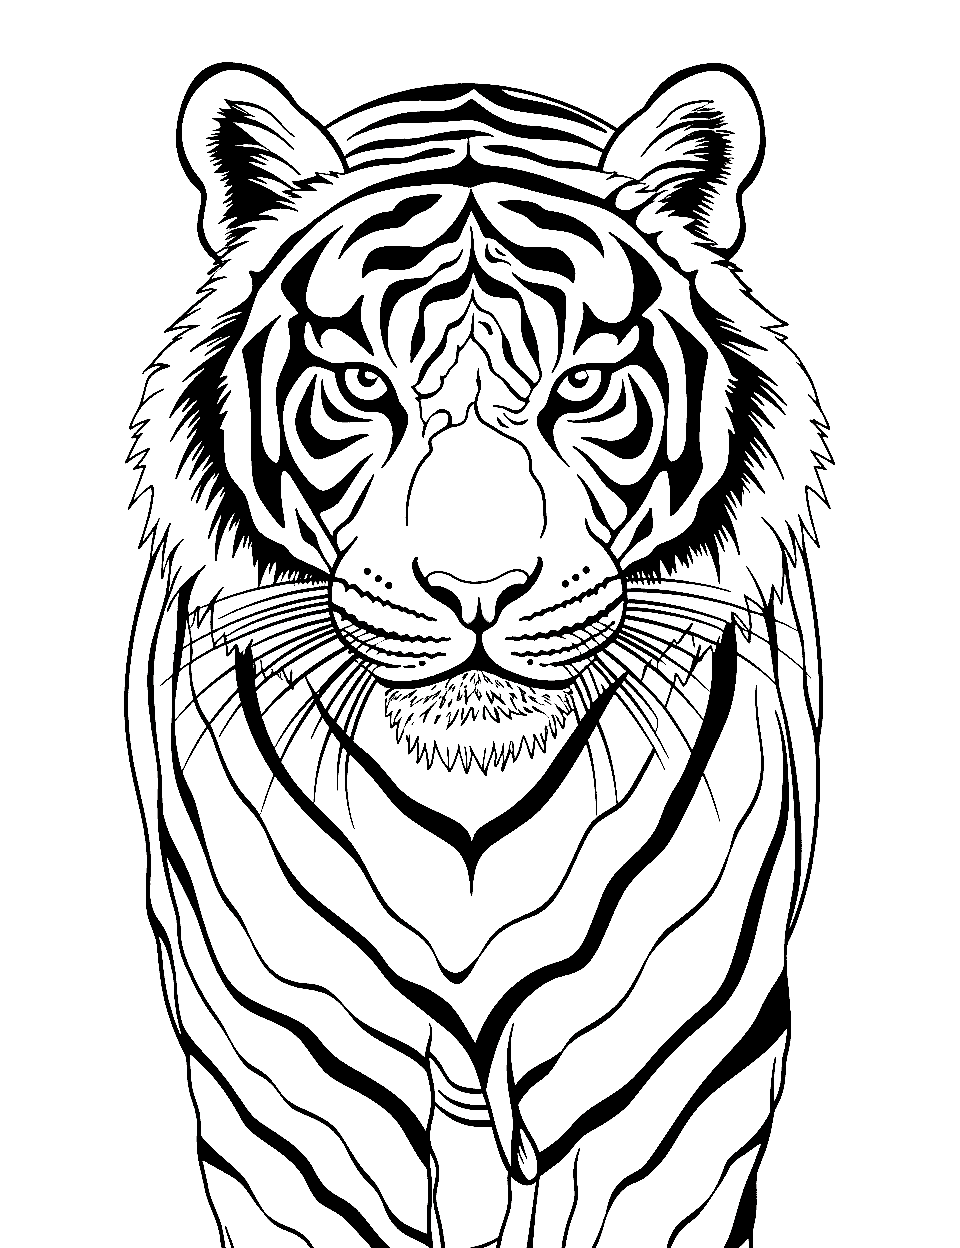 Striped Symmetry Tiger Coloring Page - A tiger showcasing the symmetry of its stripe pattern.